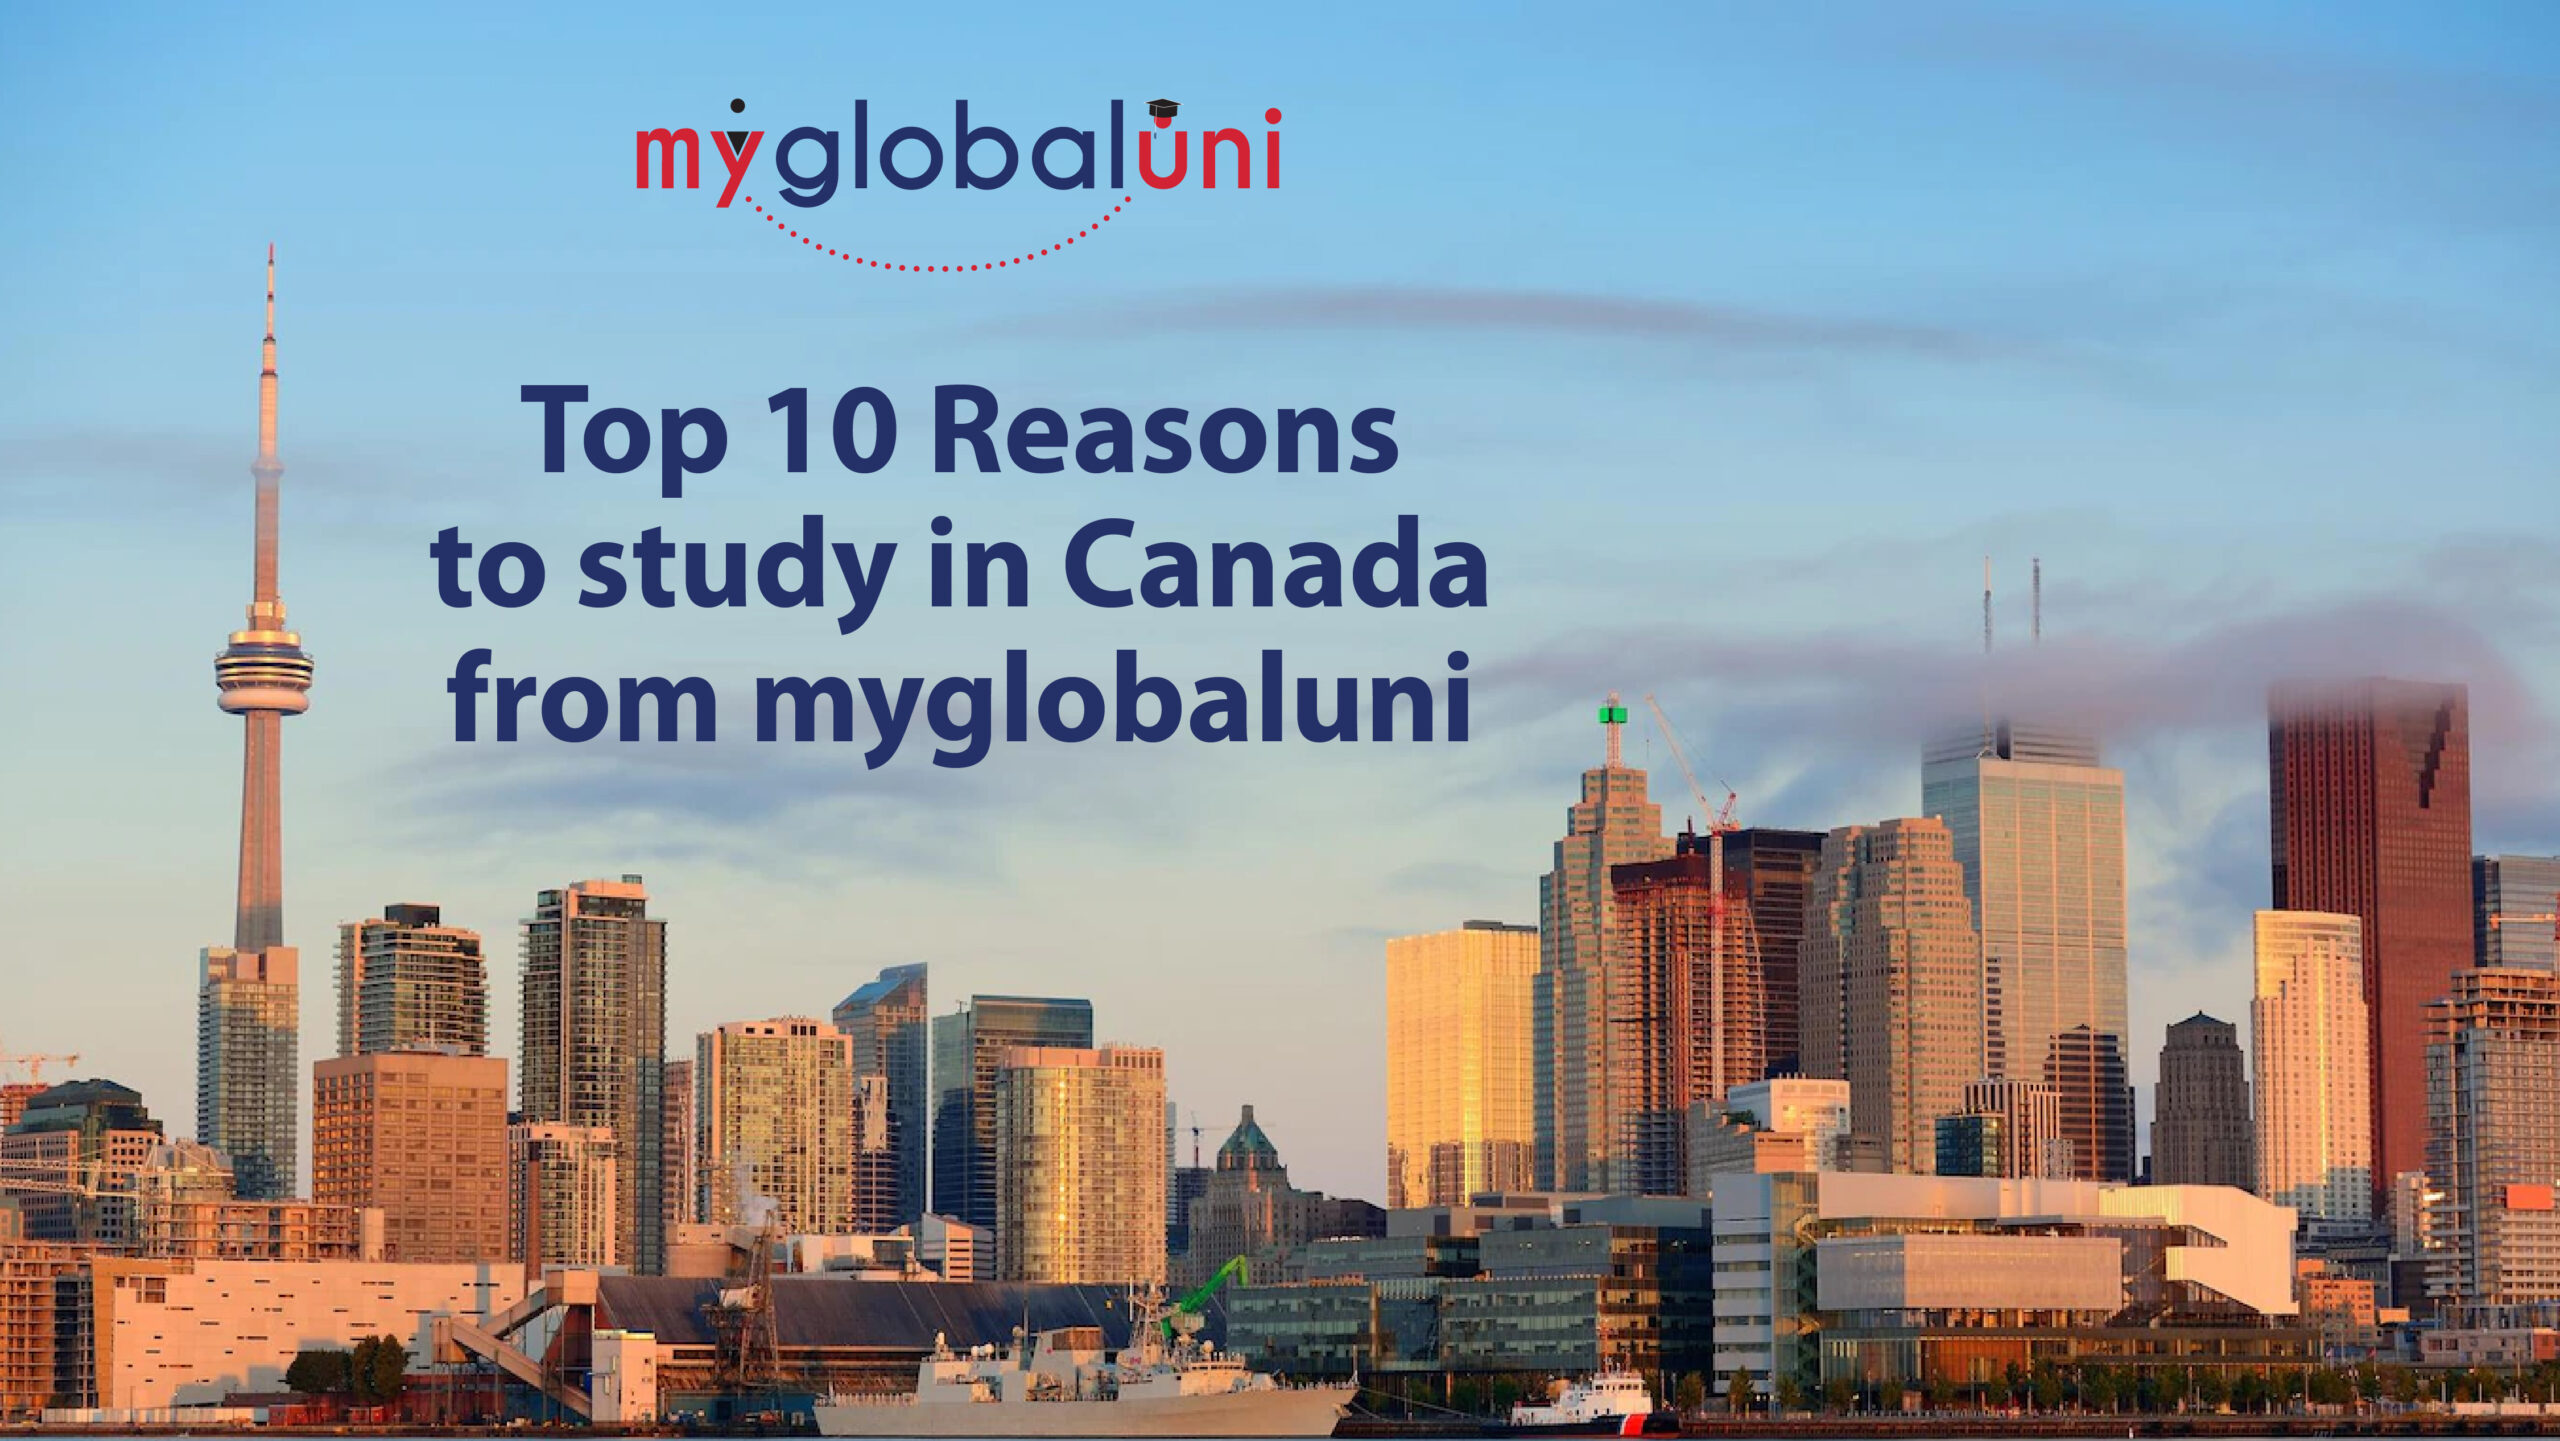 Top 10 Reasons to study in Canada from myglobaluni